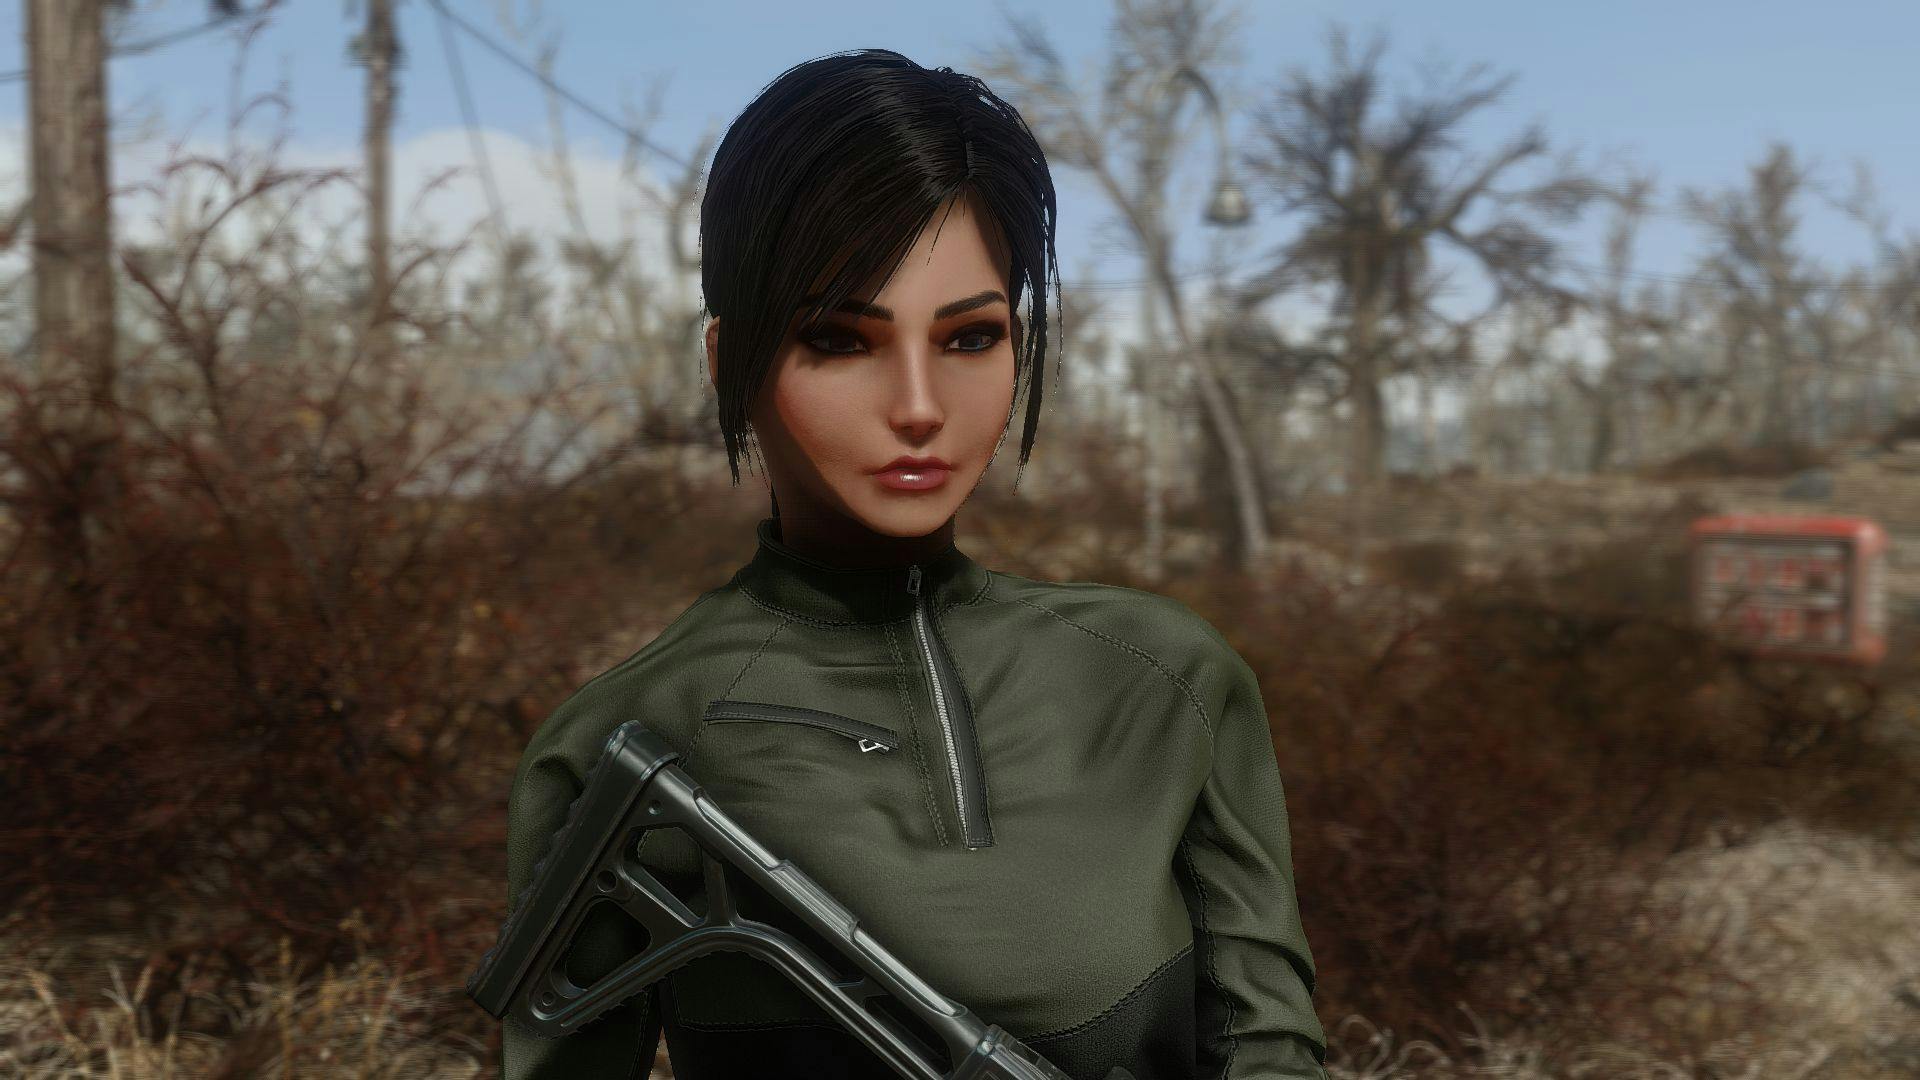 /7-best-fallout-4-body-mods-and-face-mods-kc2537as feature image